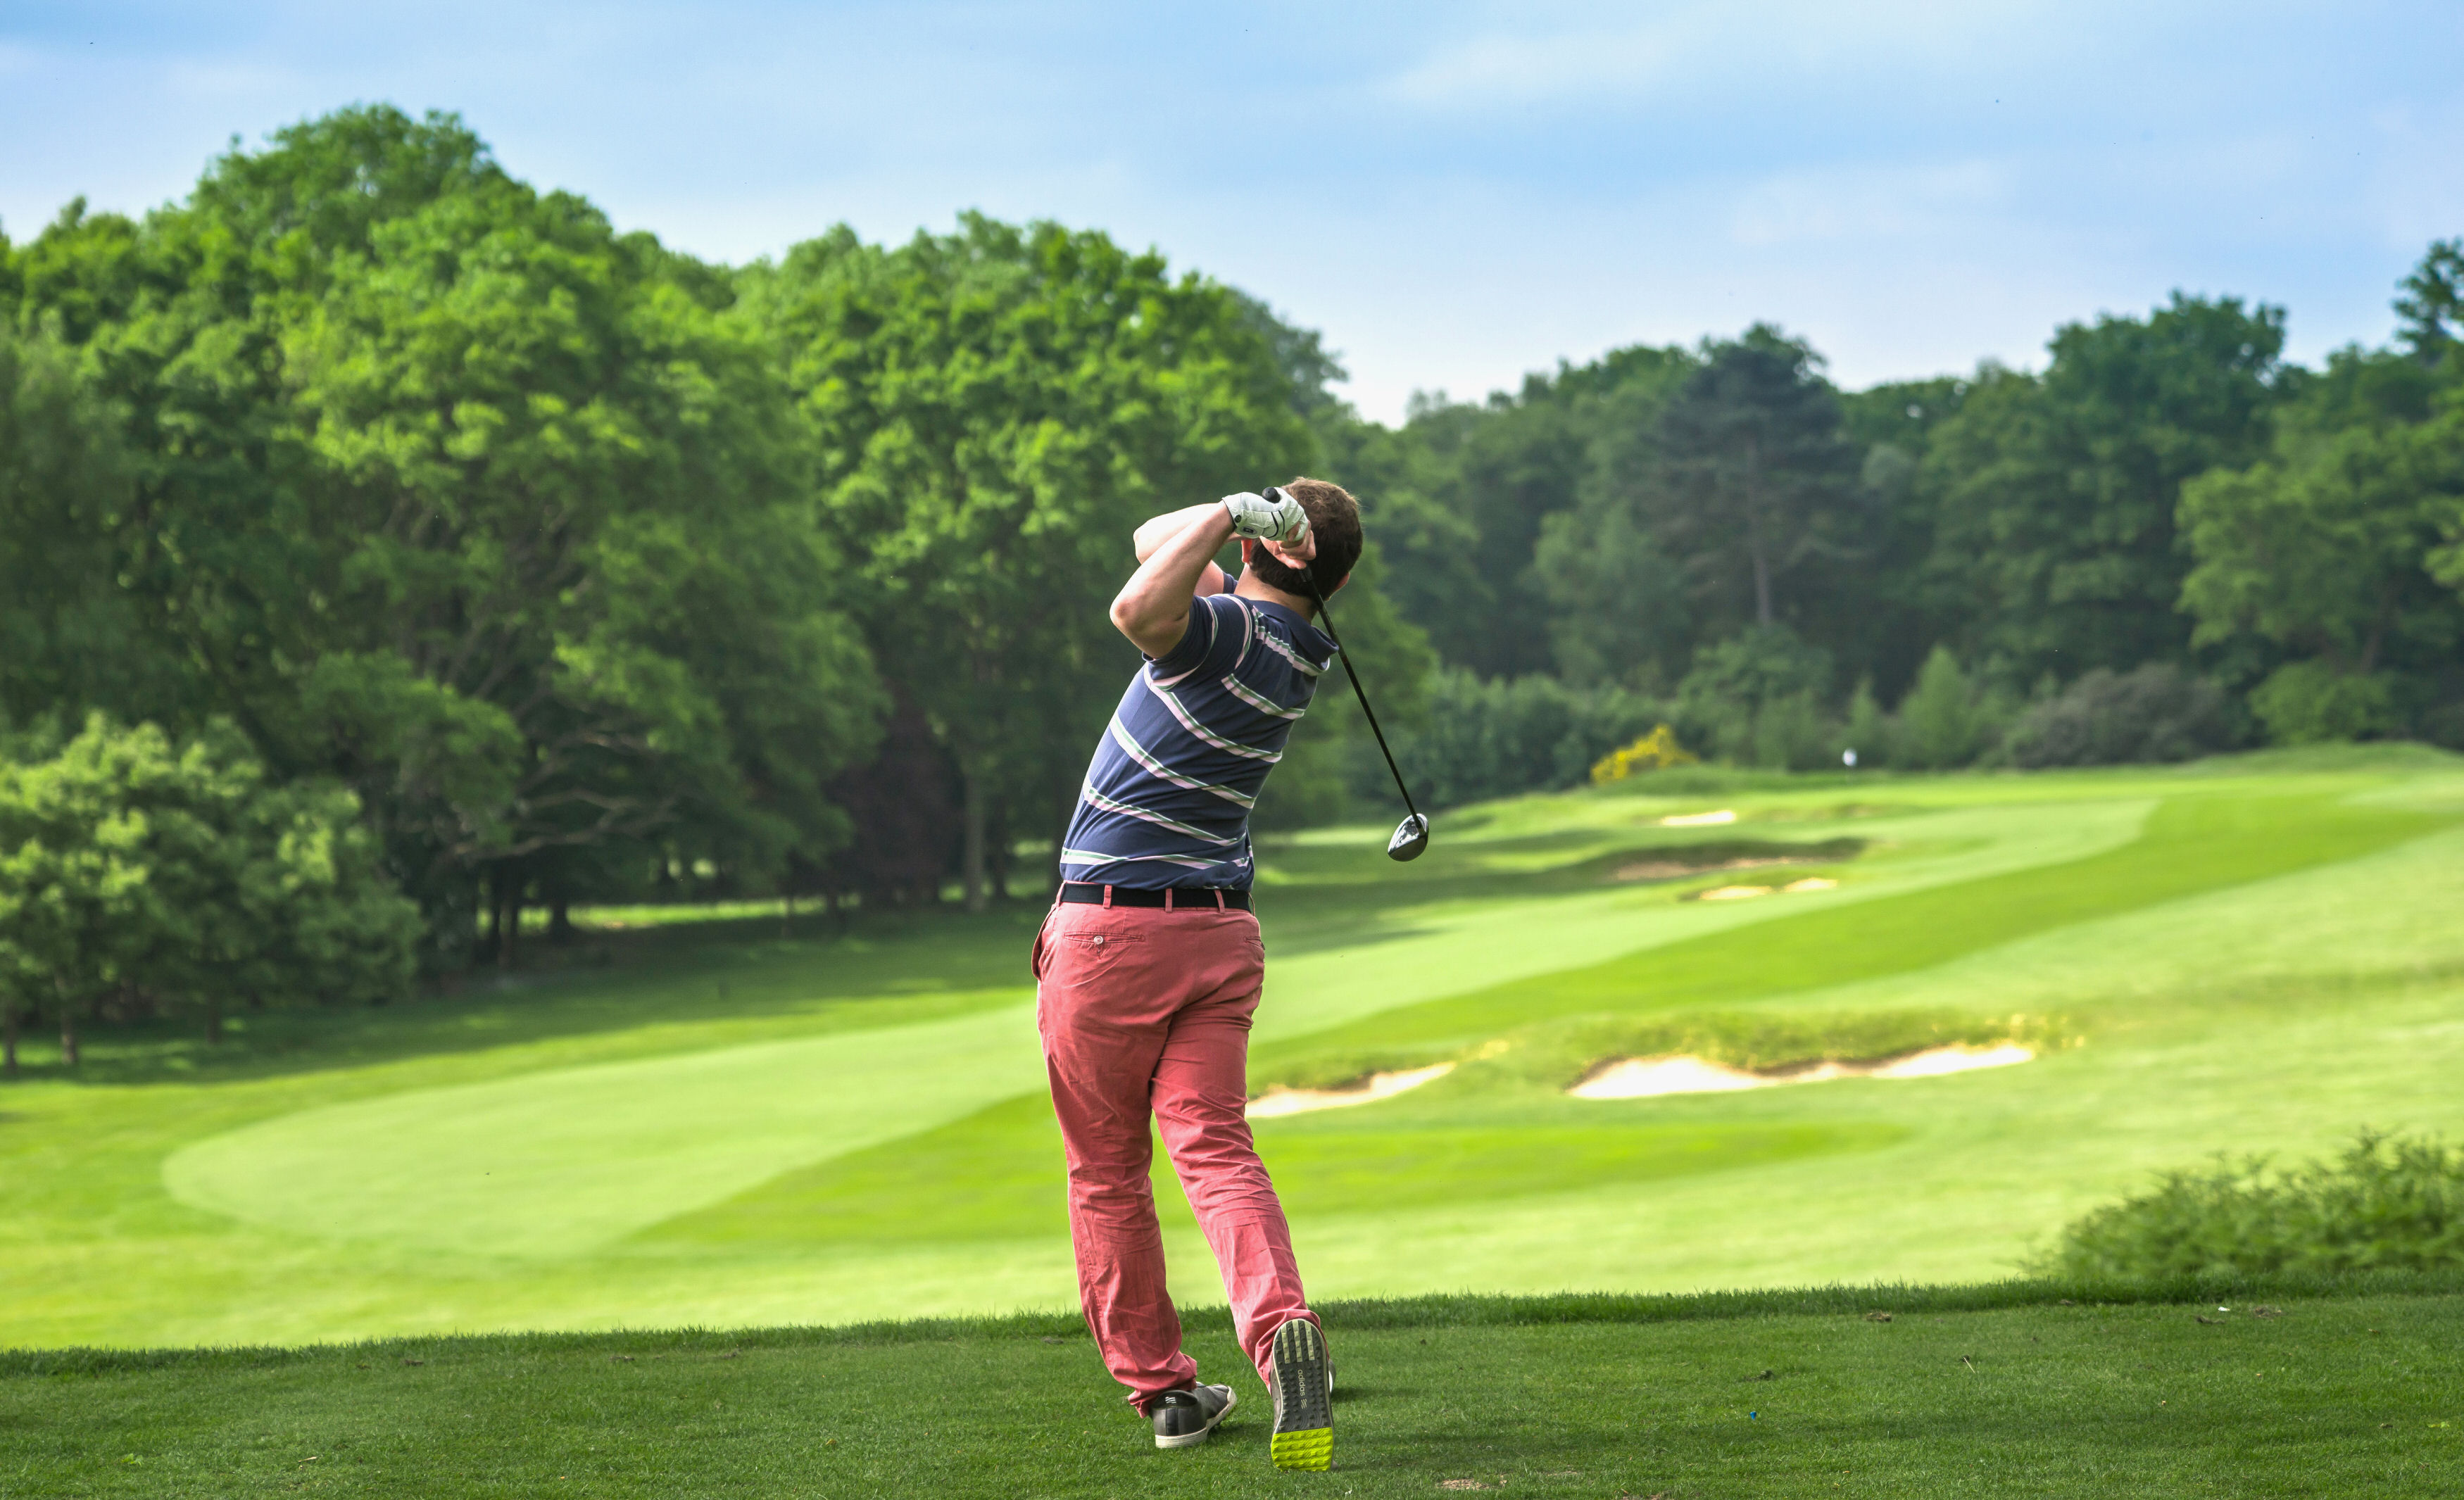 UK scientific adviser: Yes play golf, but keep a distance